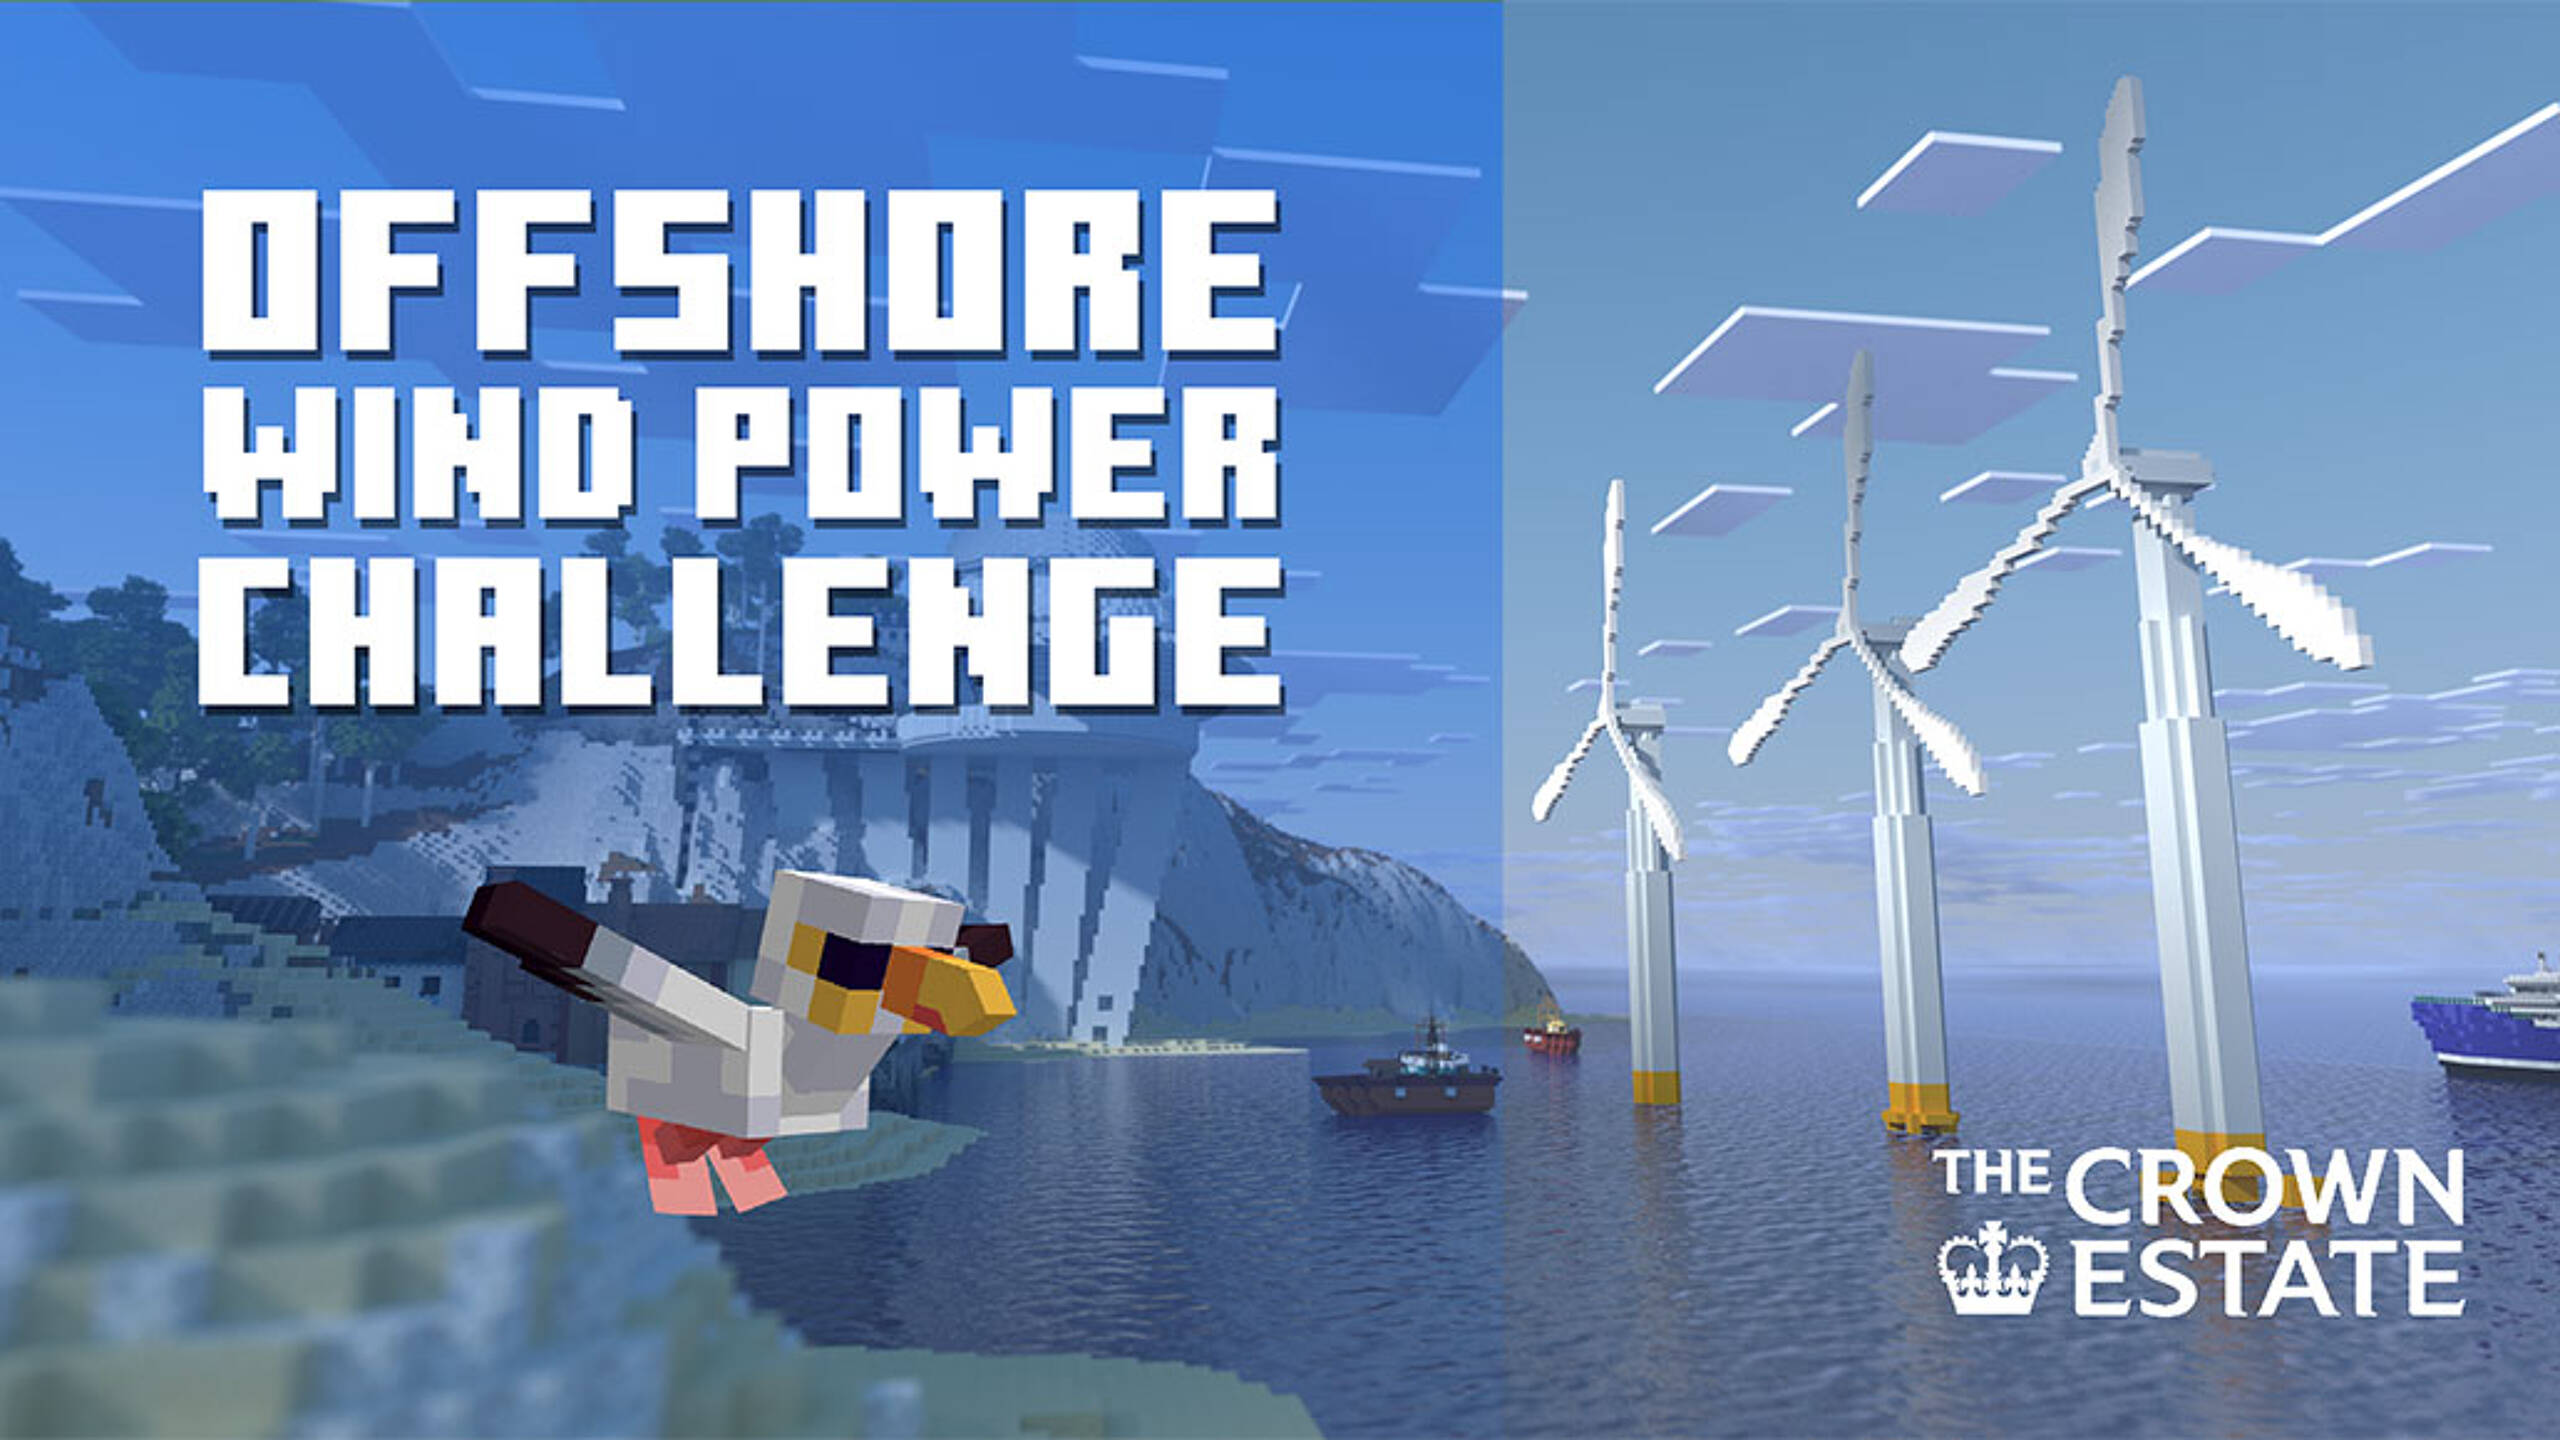 Microsoft launches Minecraft worlds to teach UK students about renewable energy